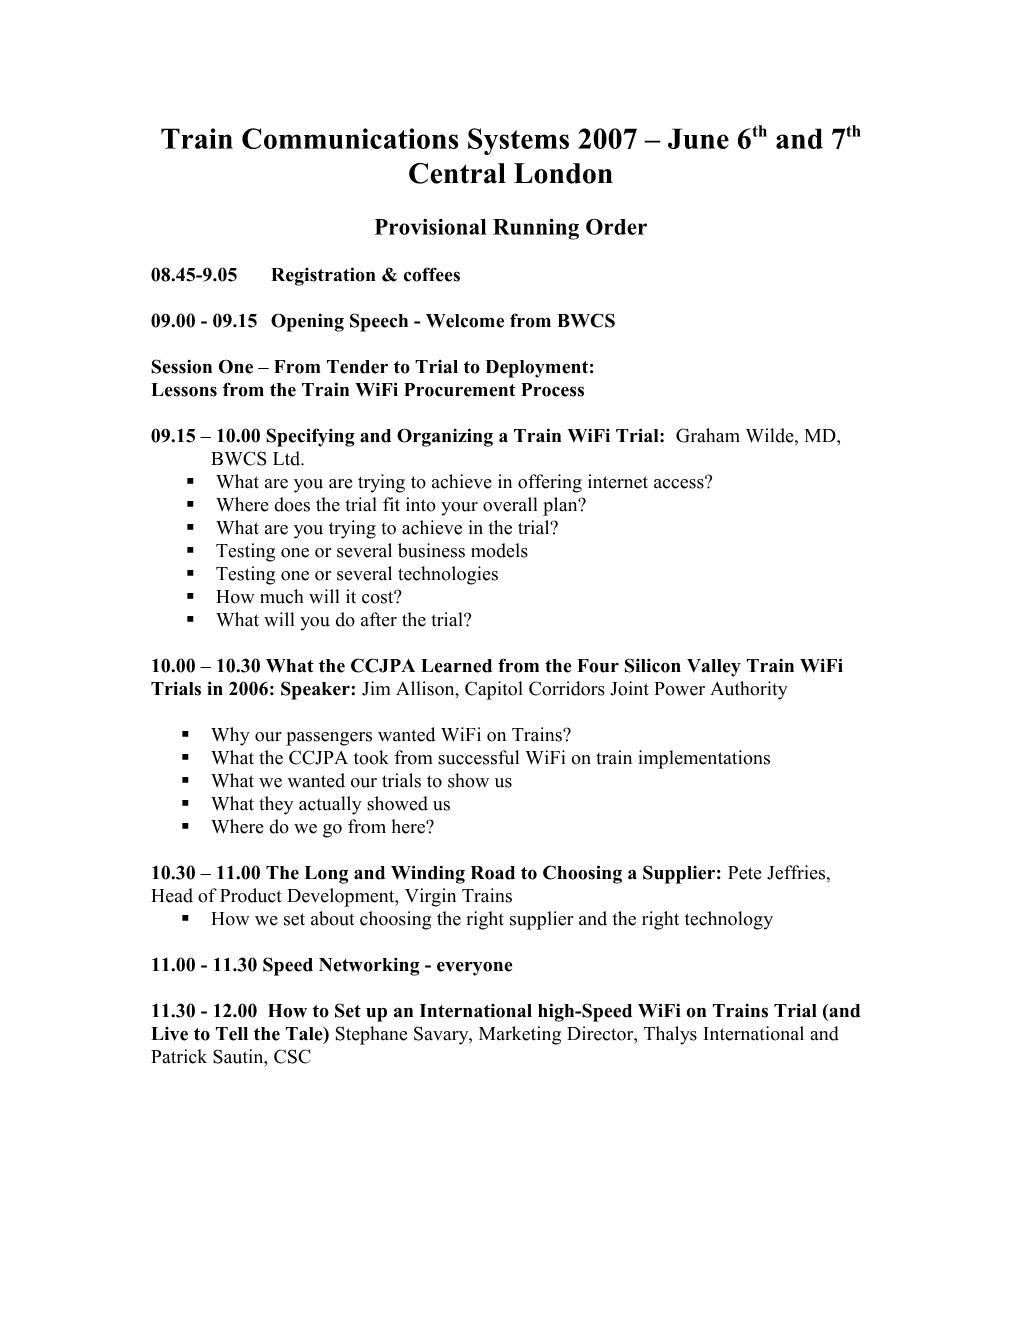 Train Communications Systems 2007 June 6Th and 7Th Central London